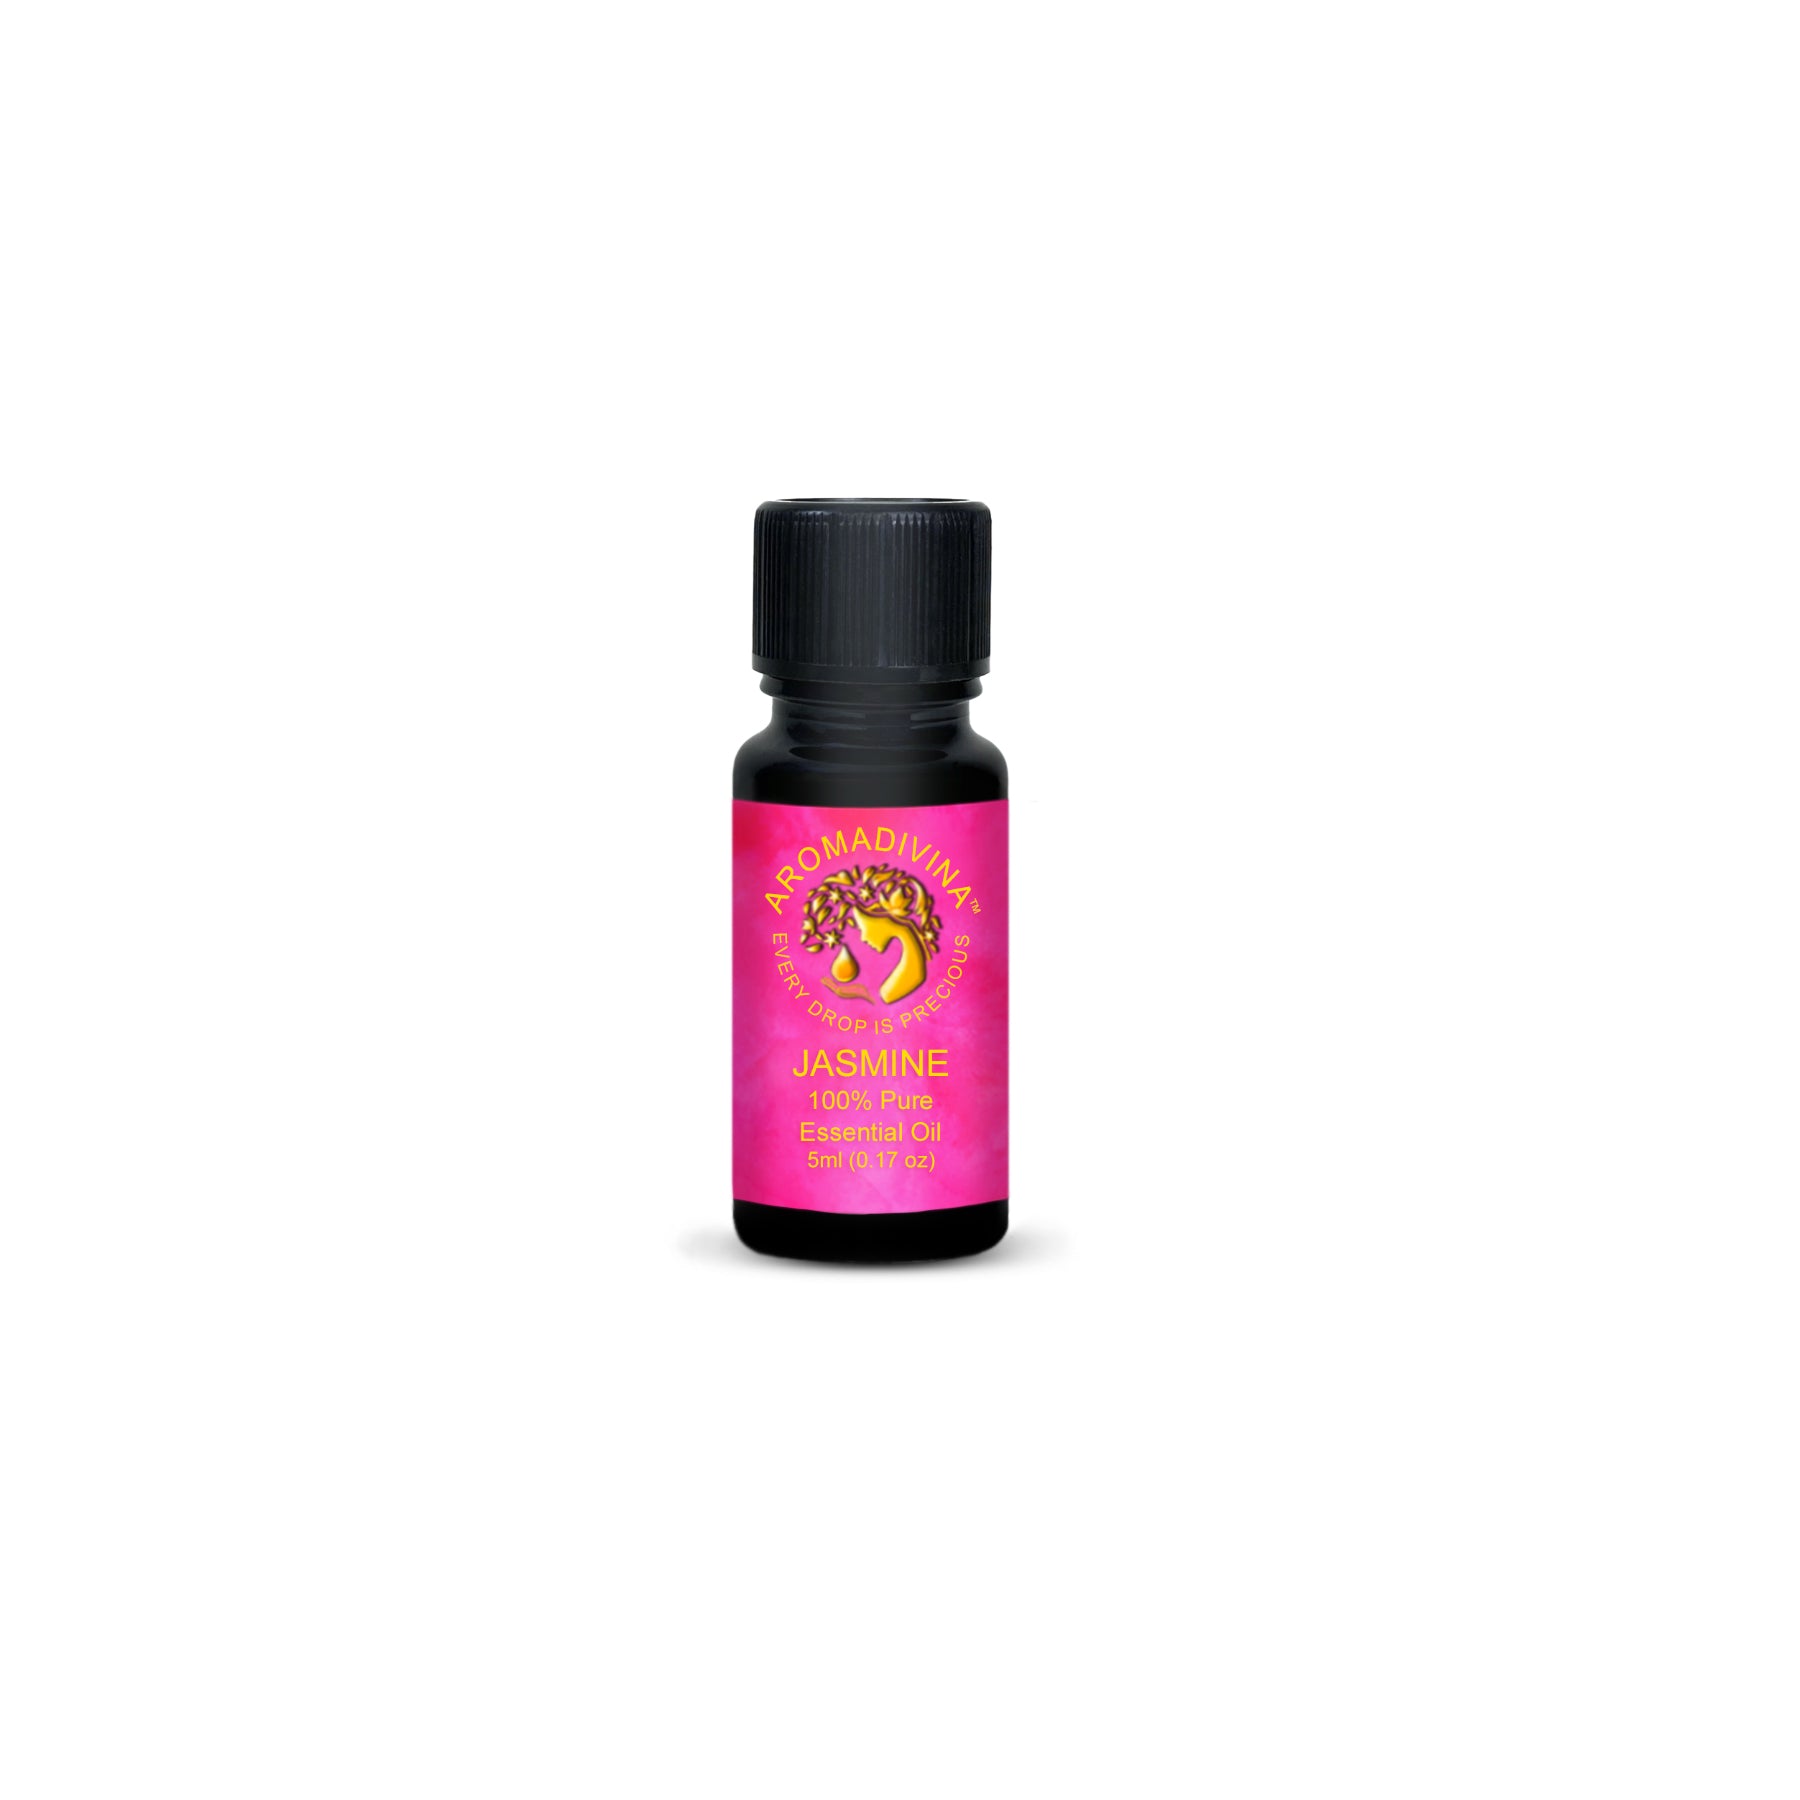 Jasmine concentrate 5ml